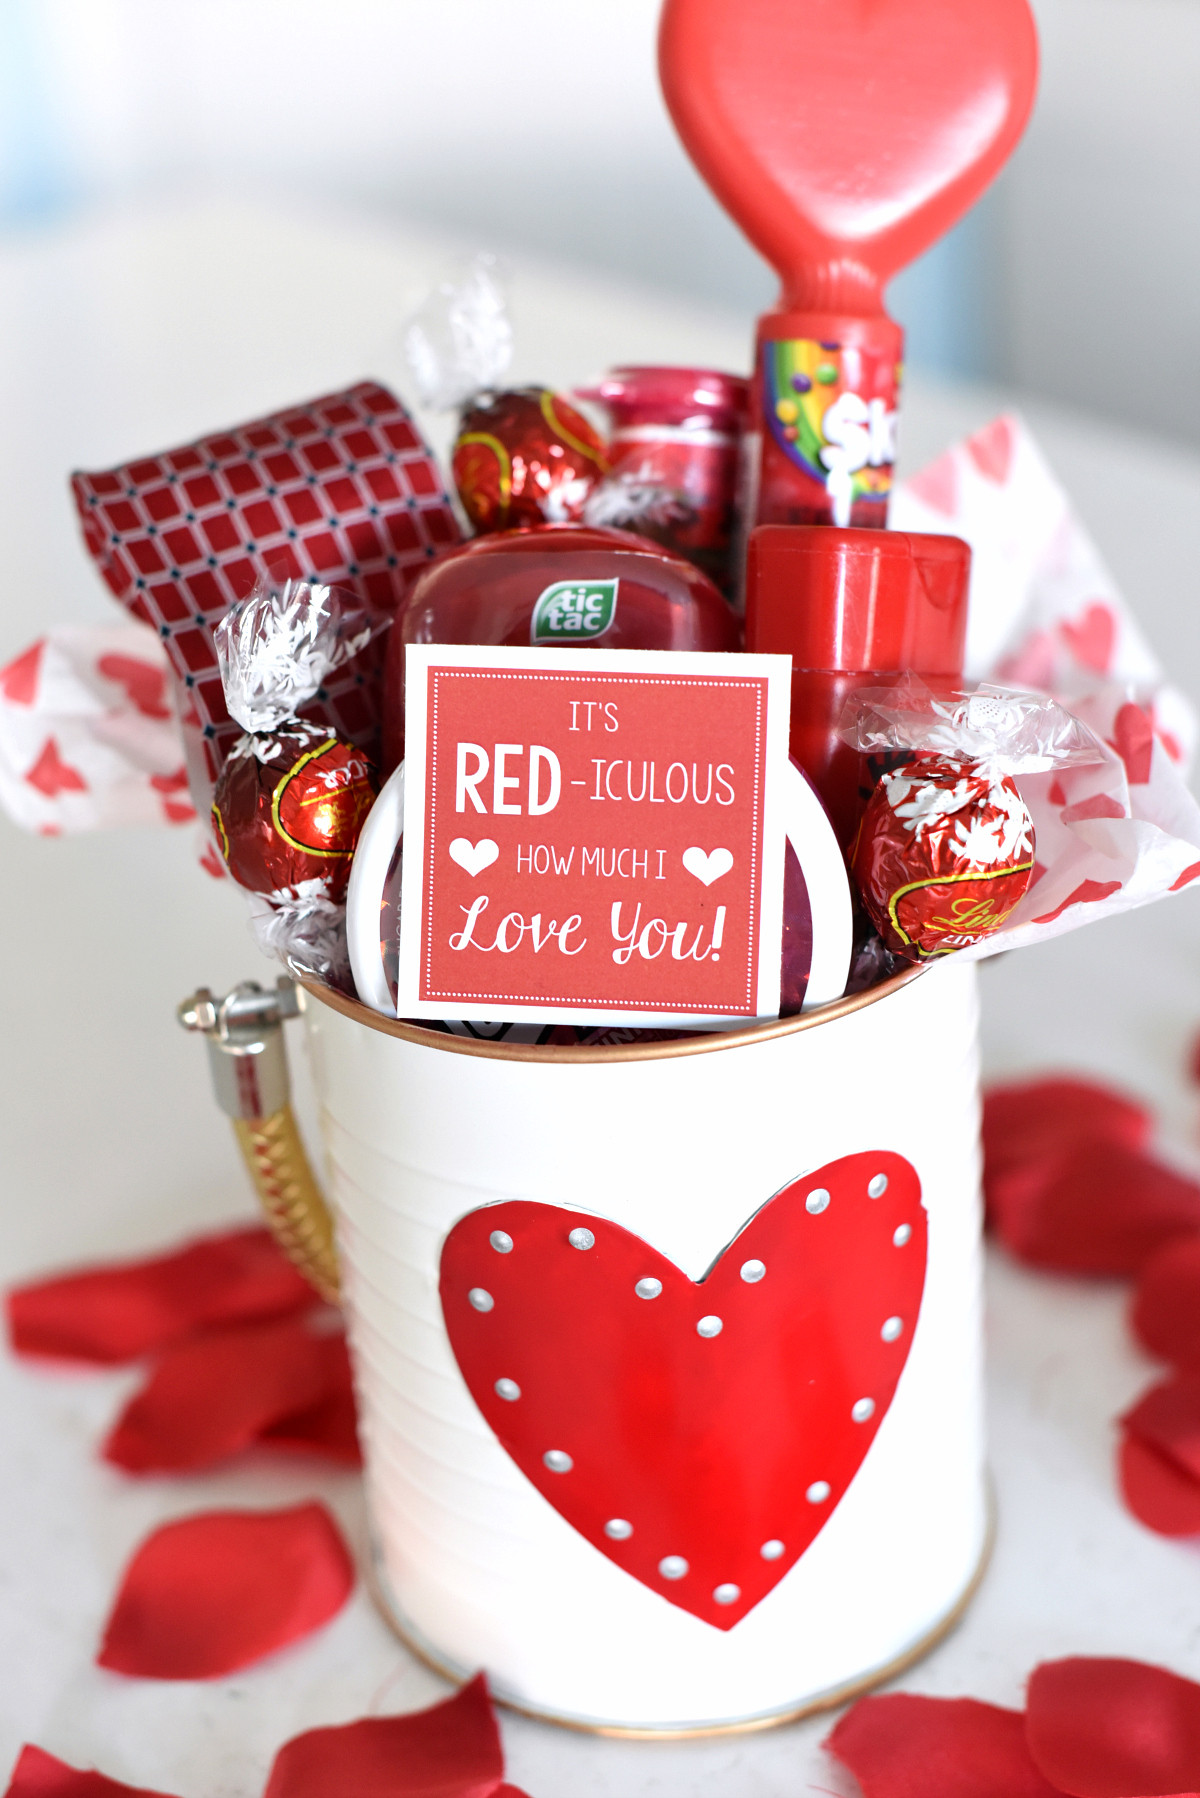 Great Valentines Gift Ideas For Her
 Fun Ways to Make Valentine s Day Special for Your Spouse